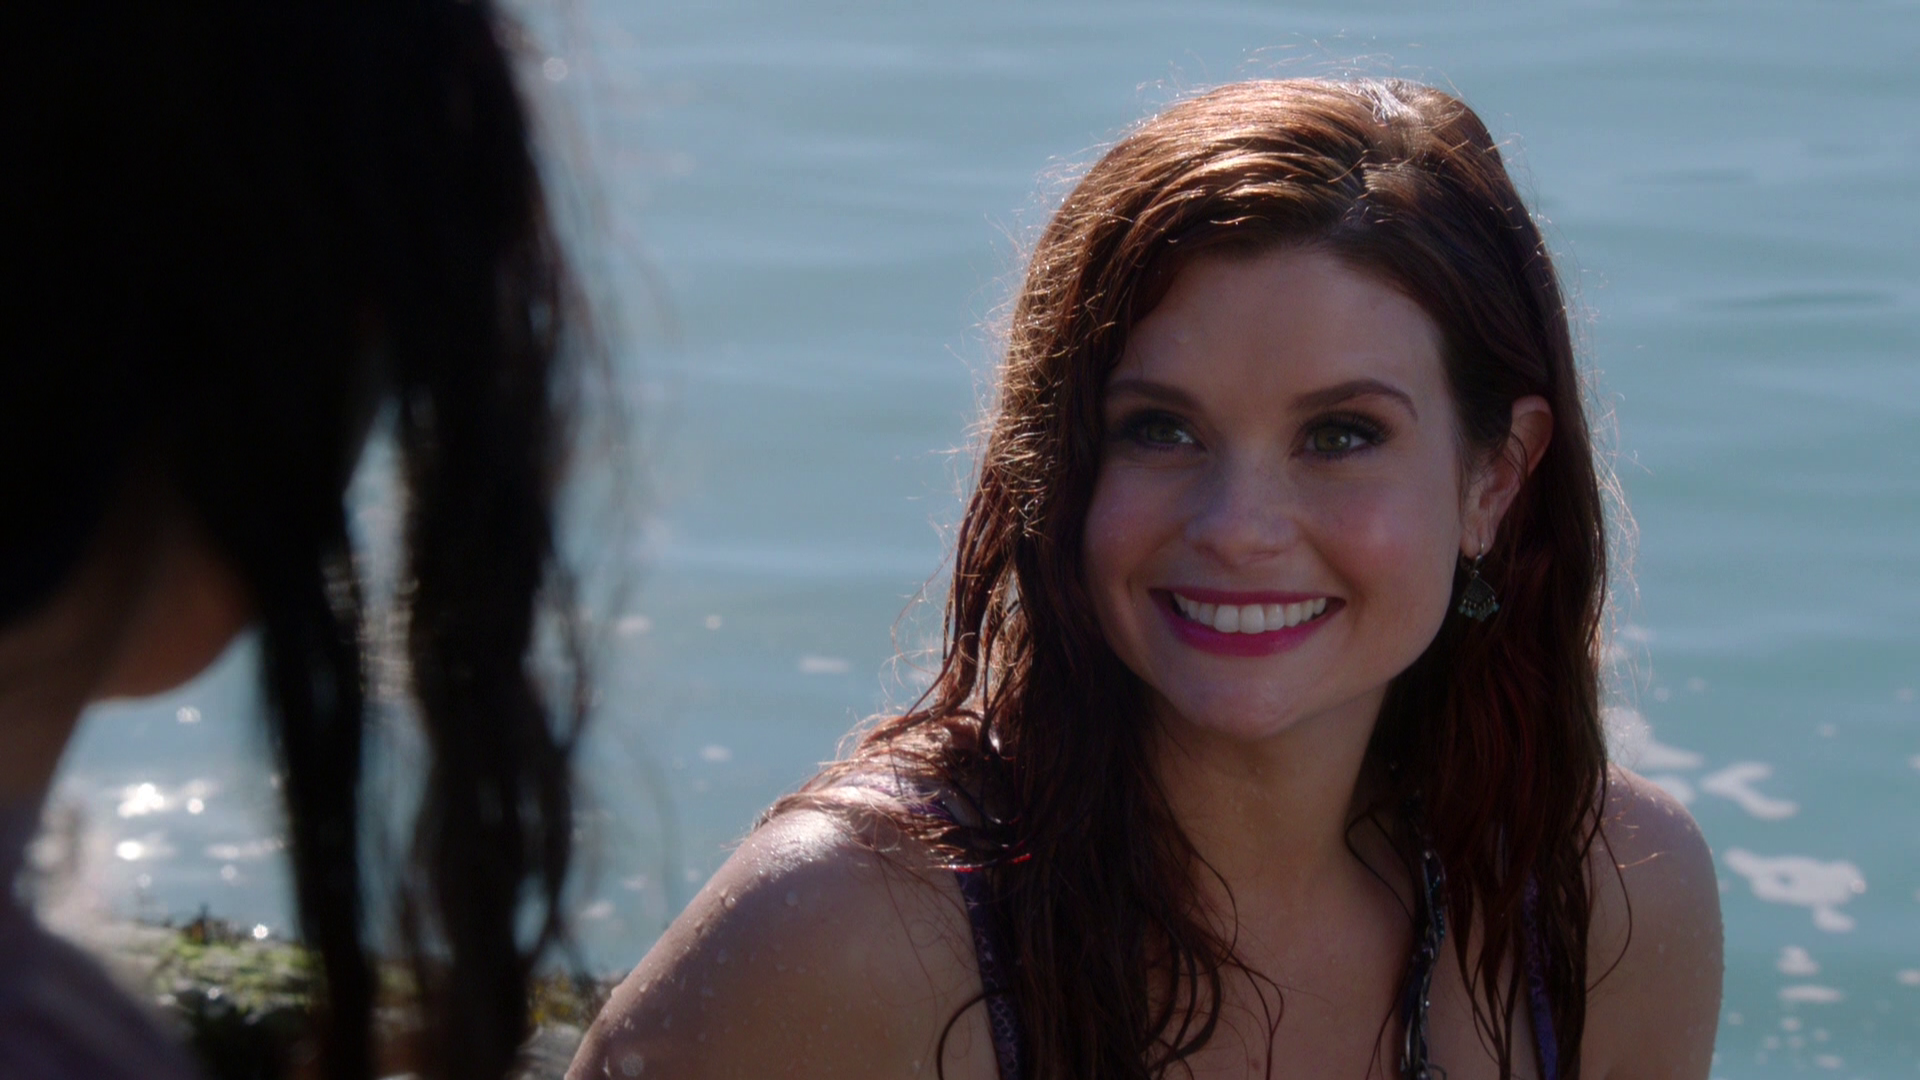 once upon a time season 3 ariel